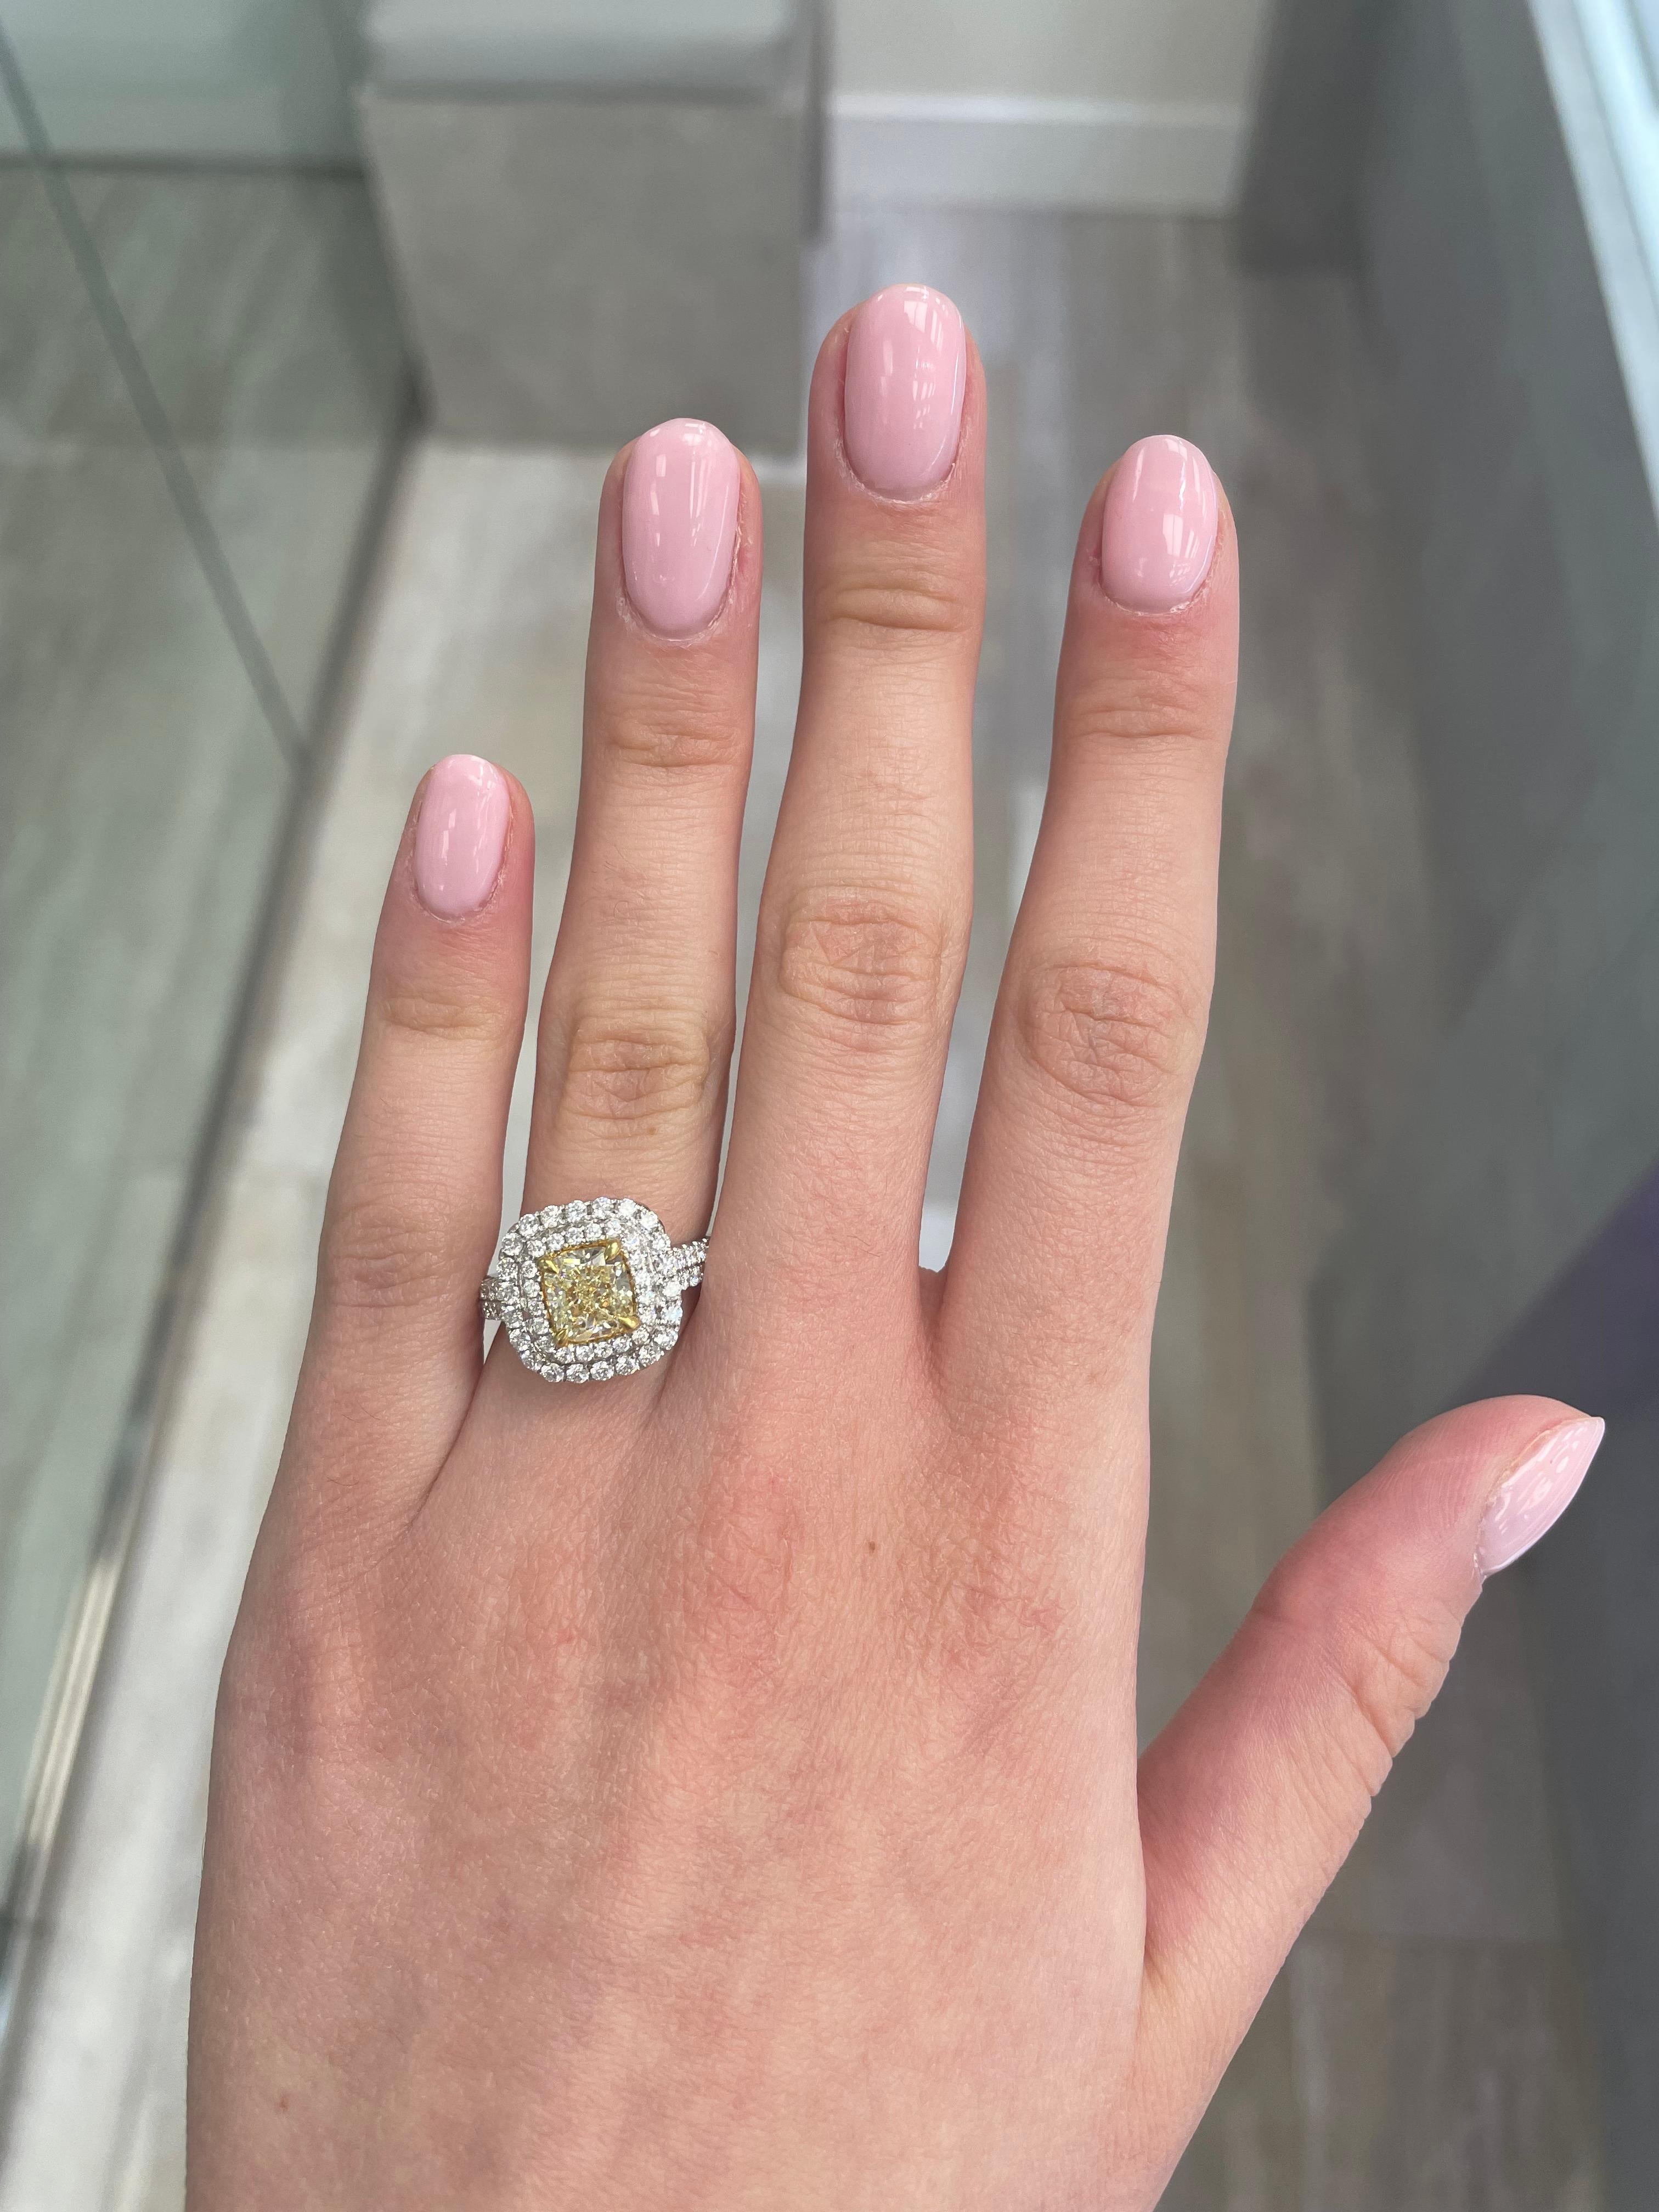 Stunning modern EGL certified yellow diamond double halo ring, two-tone 18k yellow and white gold. By Alexander Beverly Hills
2.66 carats total diamond weight.
1.50 carat cushion cut Fancy Intense Yellow color and VS2 clarity diamond, EGL graded in